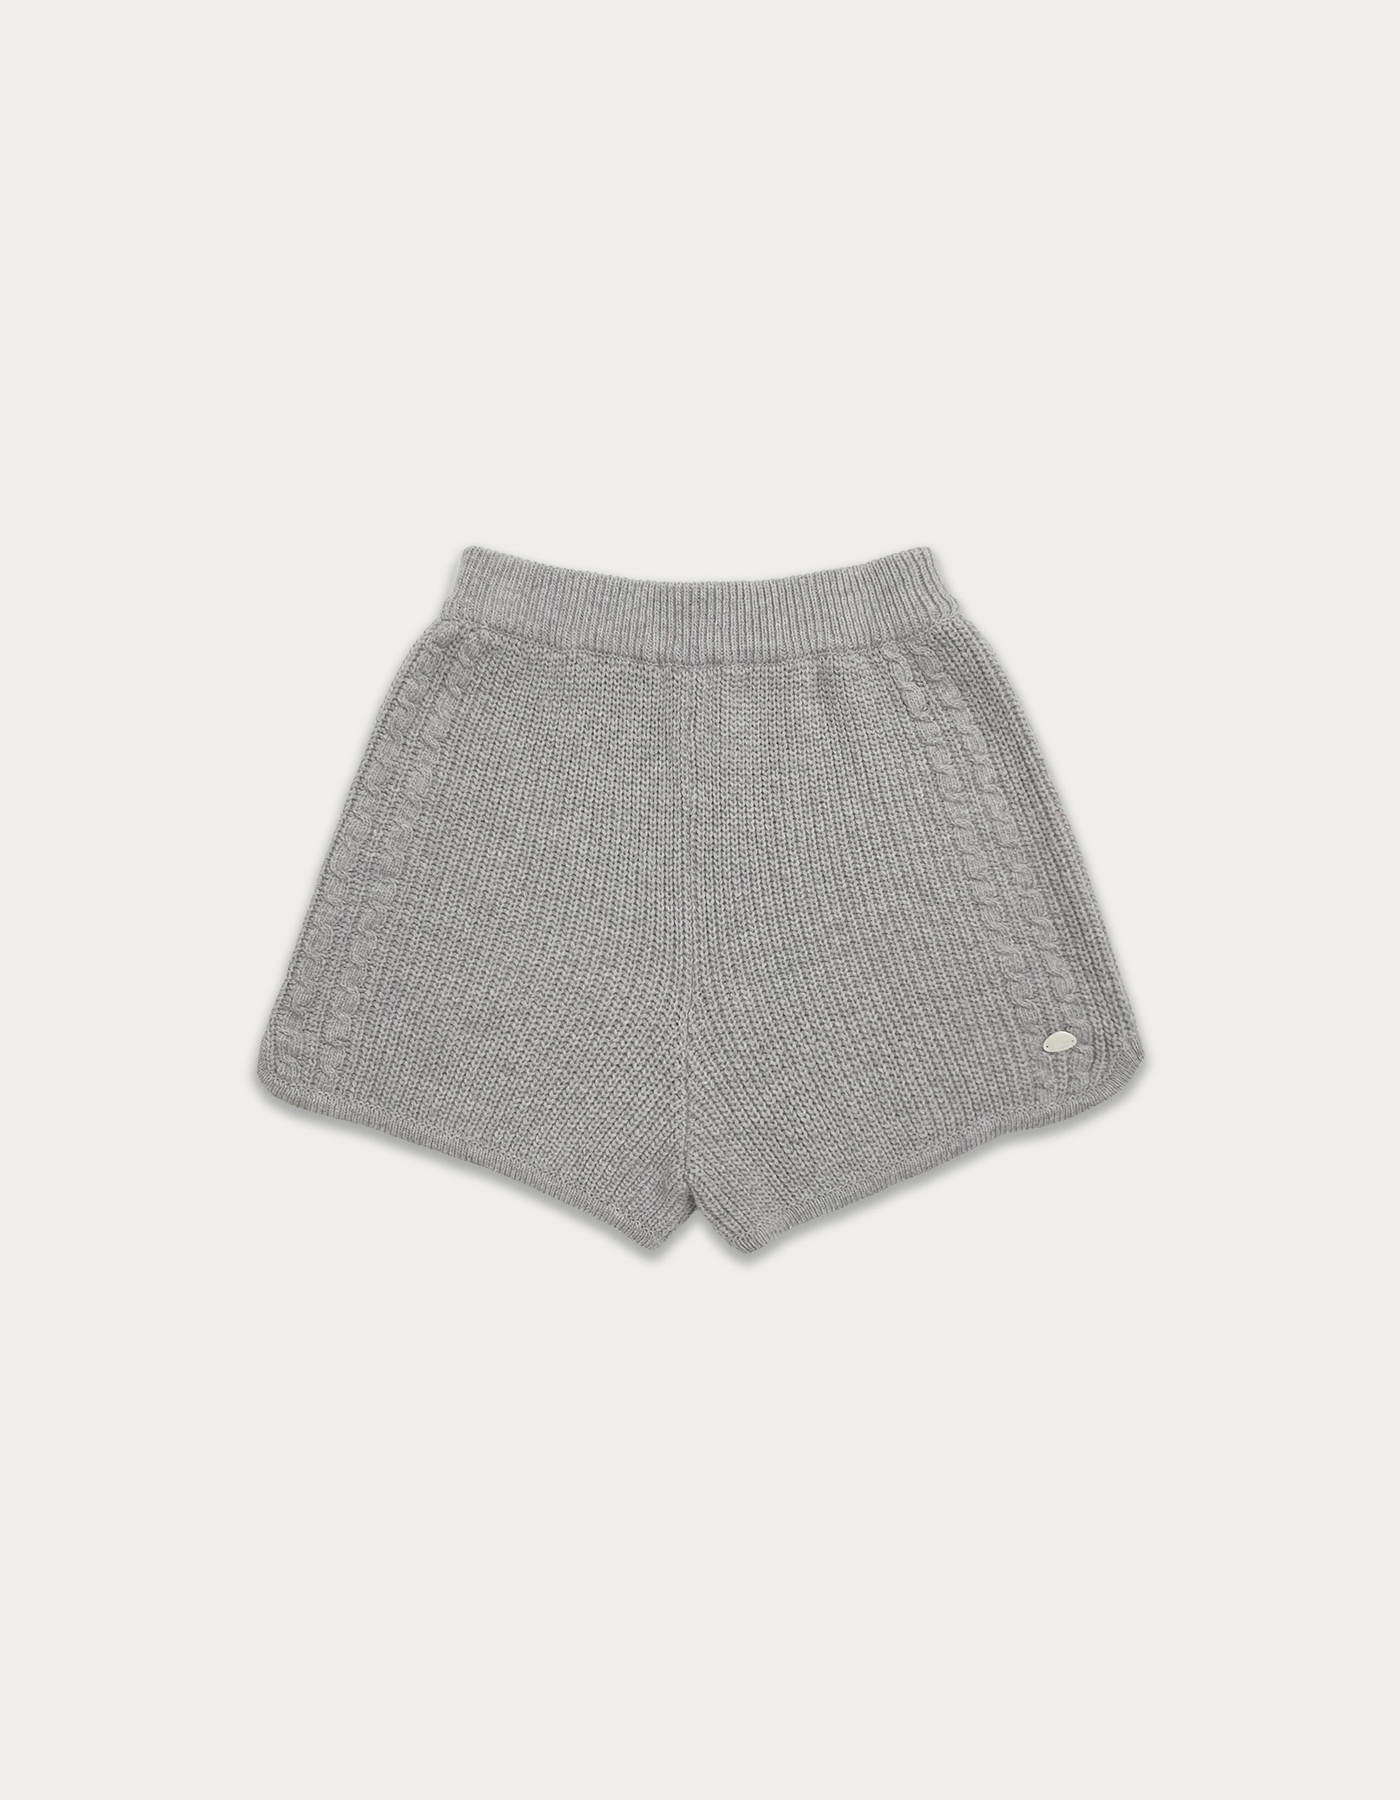 Double cable knit pants - grey